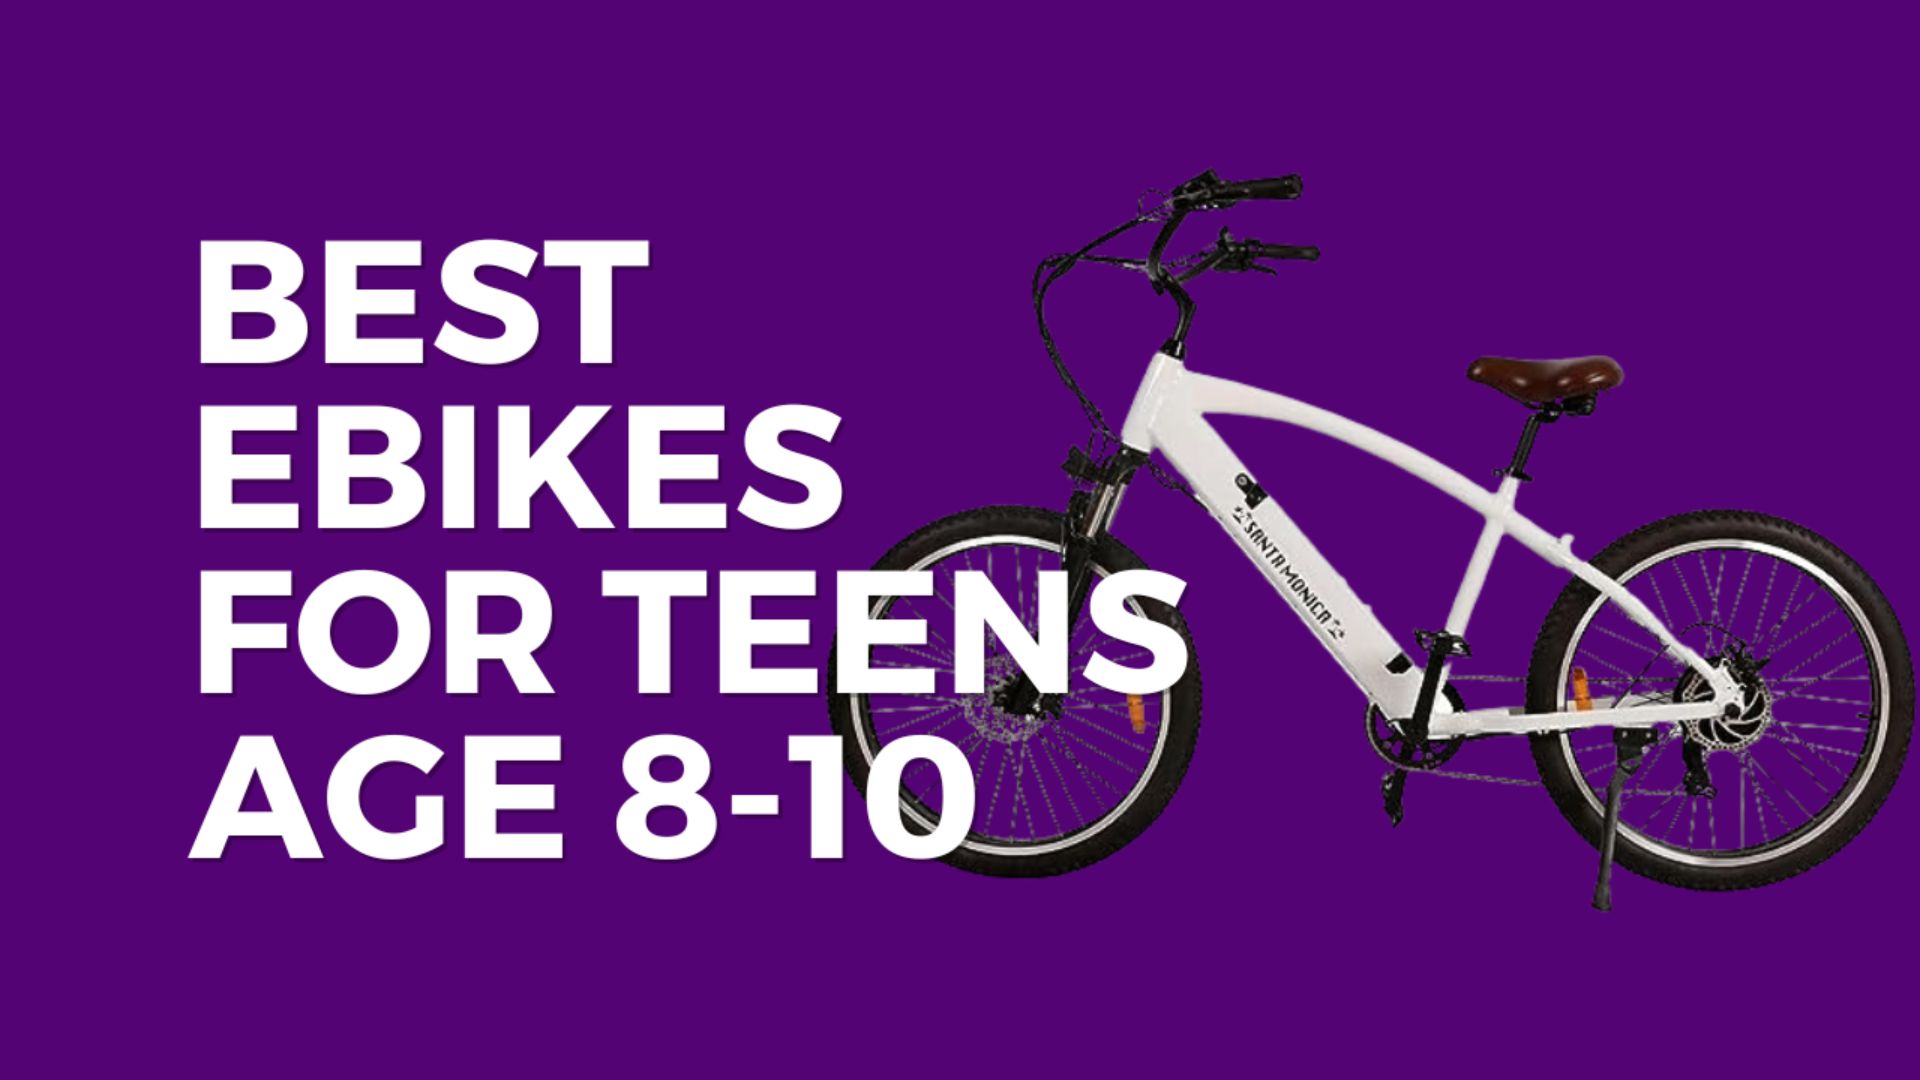 Best Ebikes For Teens Age 8-10 USA